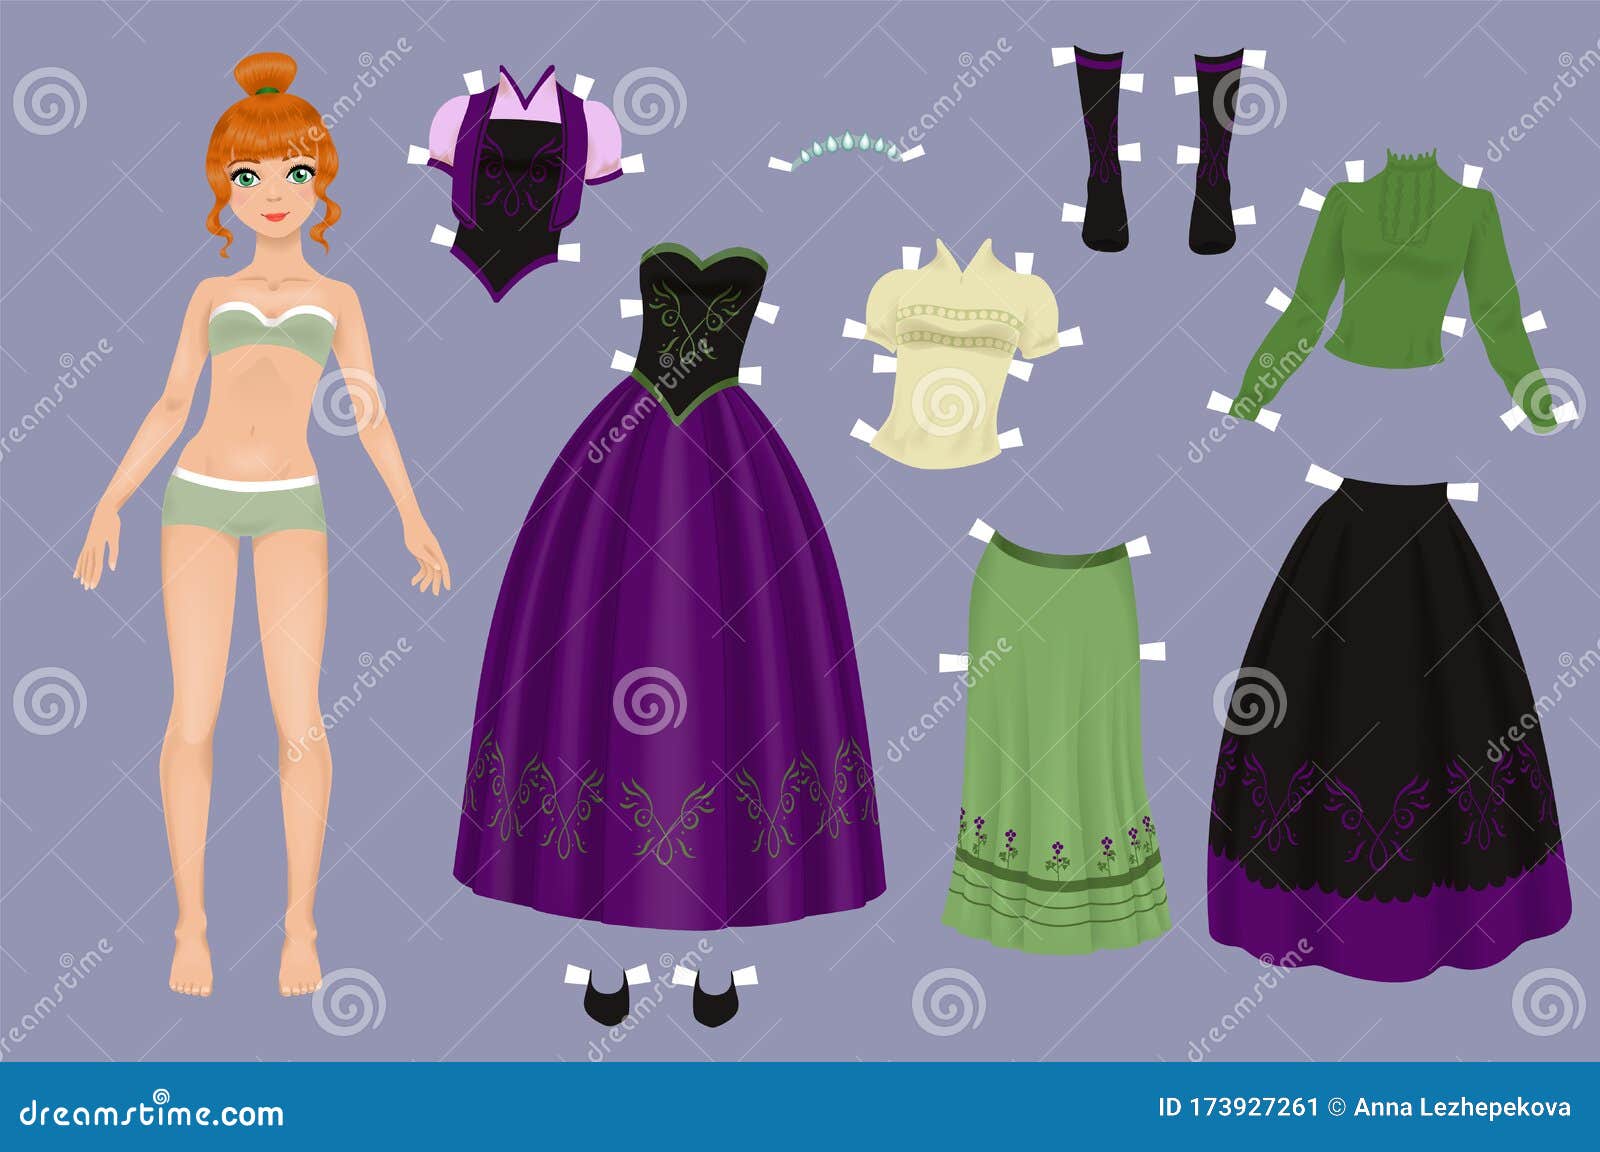 Paper Doll Color, Cut, Play Princess Dress Up: Coloring book for kids -  Princess paper dolls